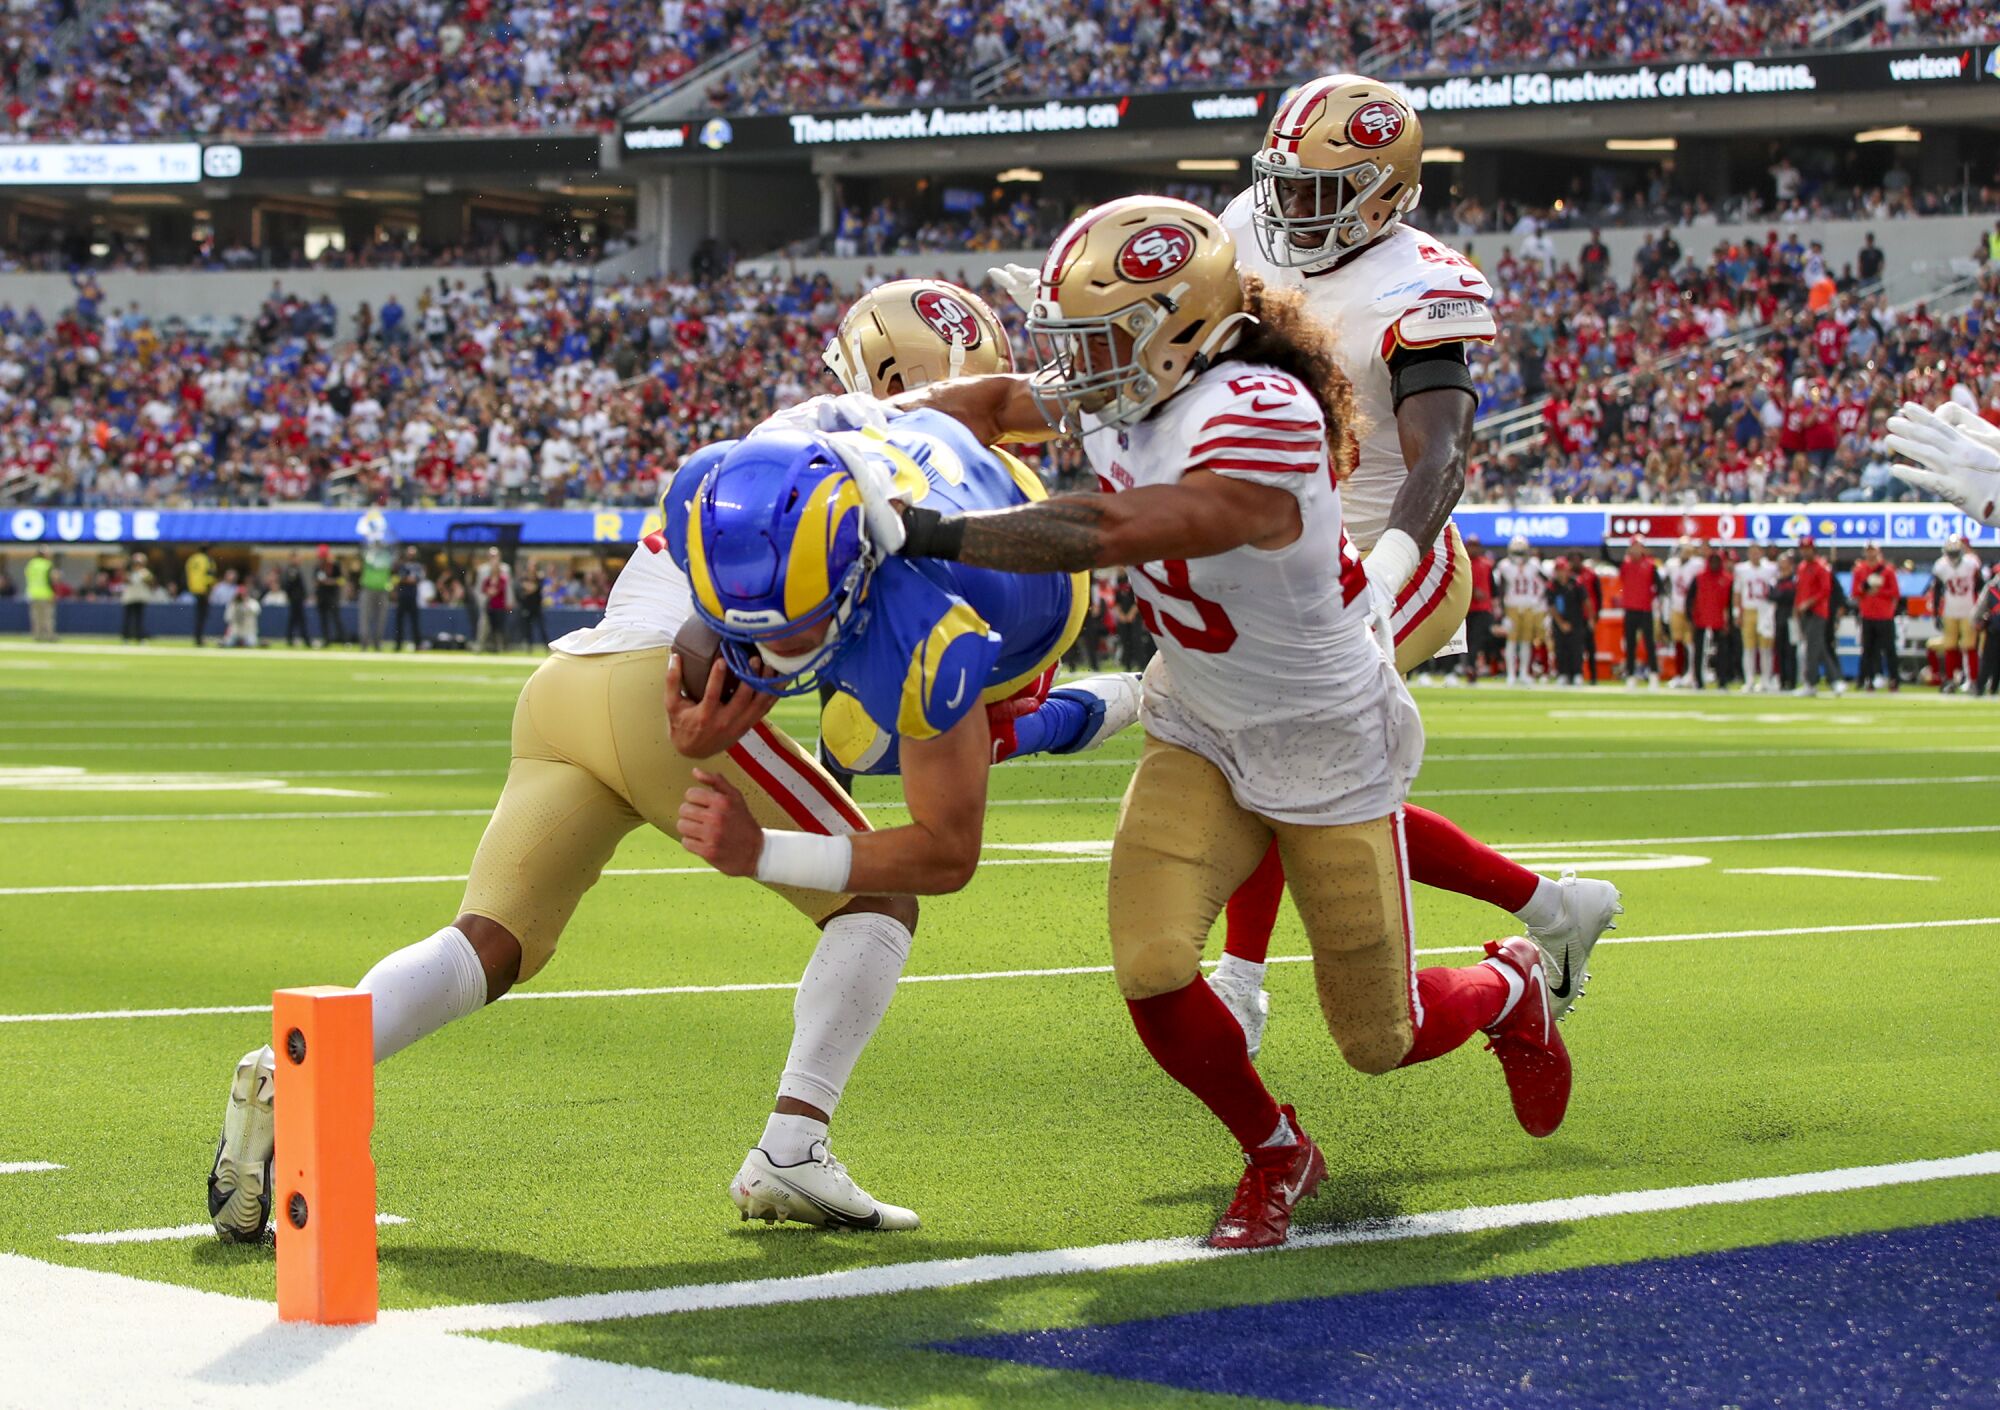 Rams quarterback Matthew Stafford dives into the end zone for a touchdown past 49ers players.